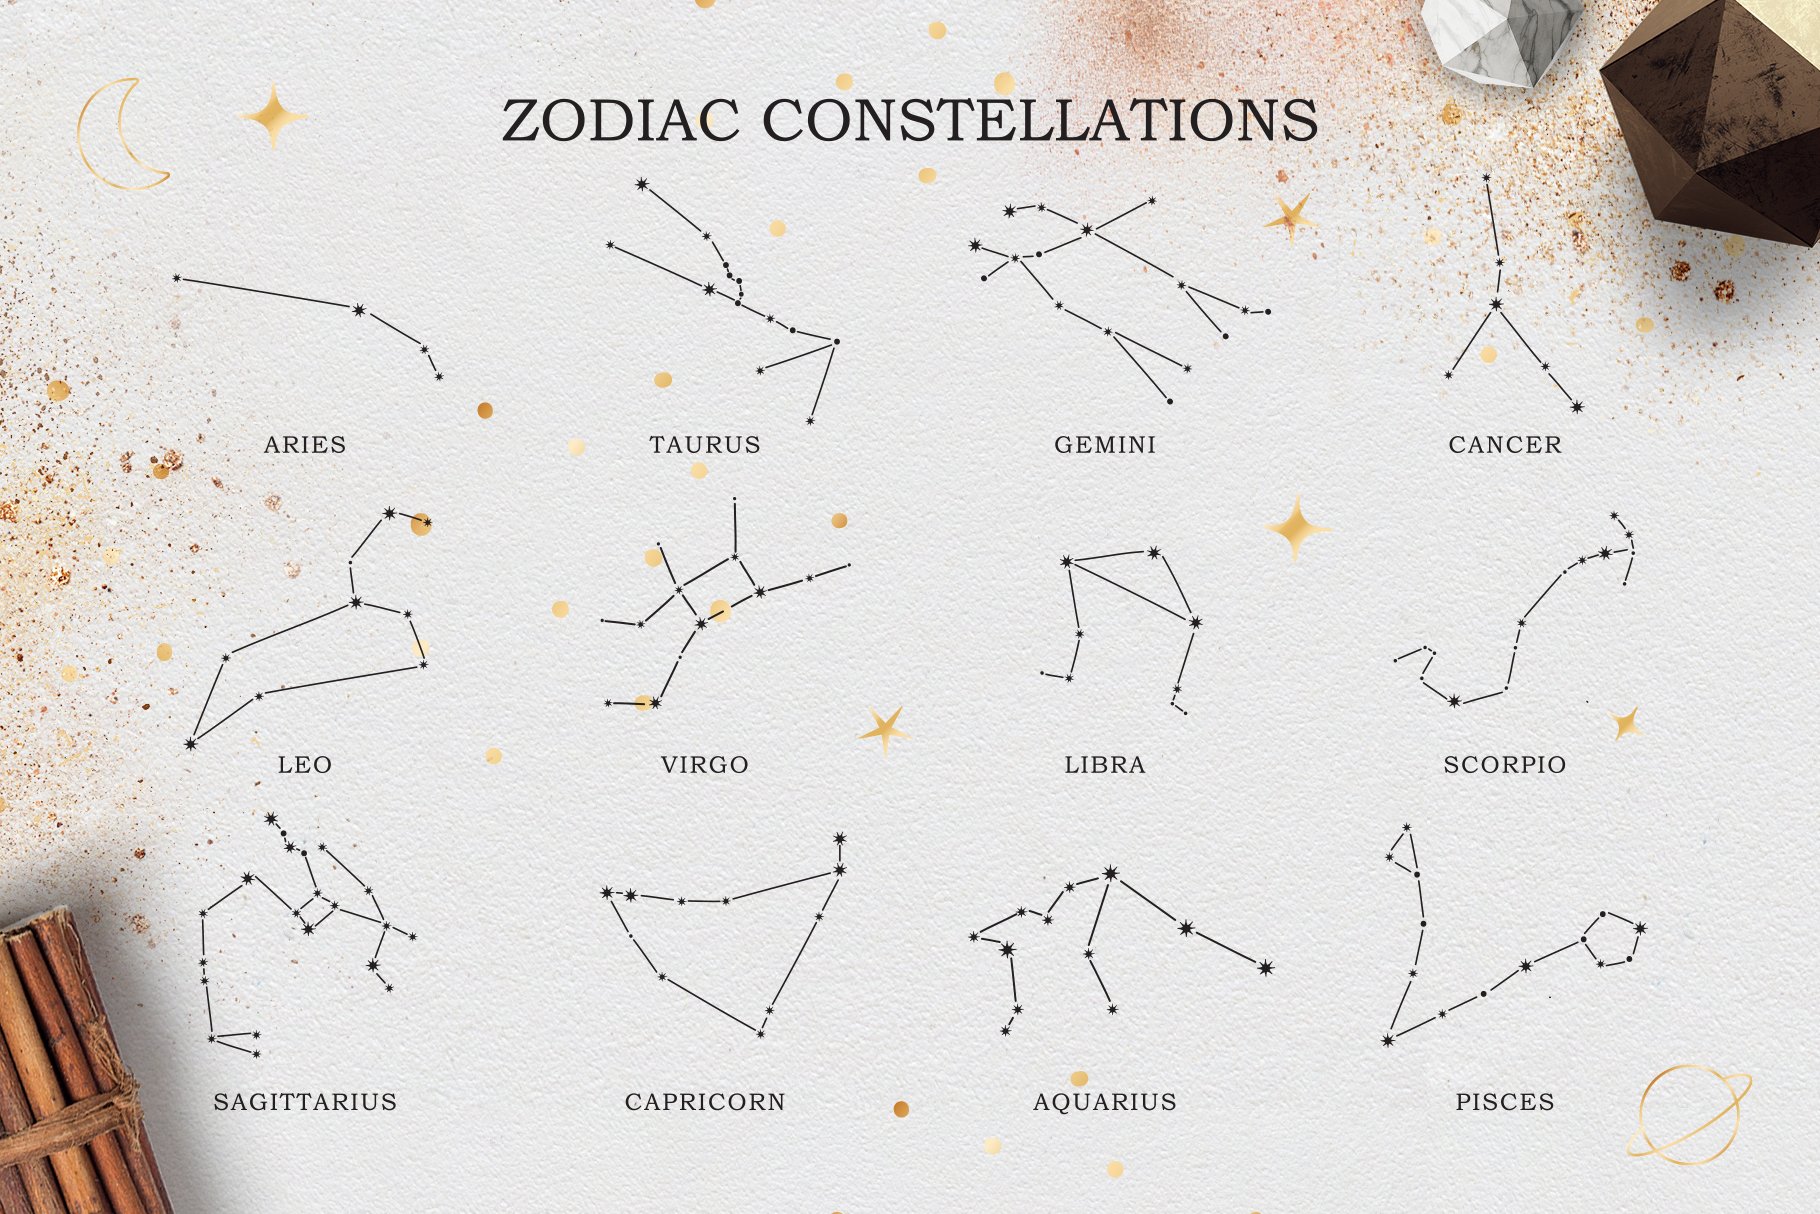 Zodiac Signs And Constellations - Design Cuts